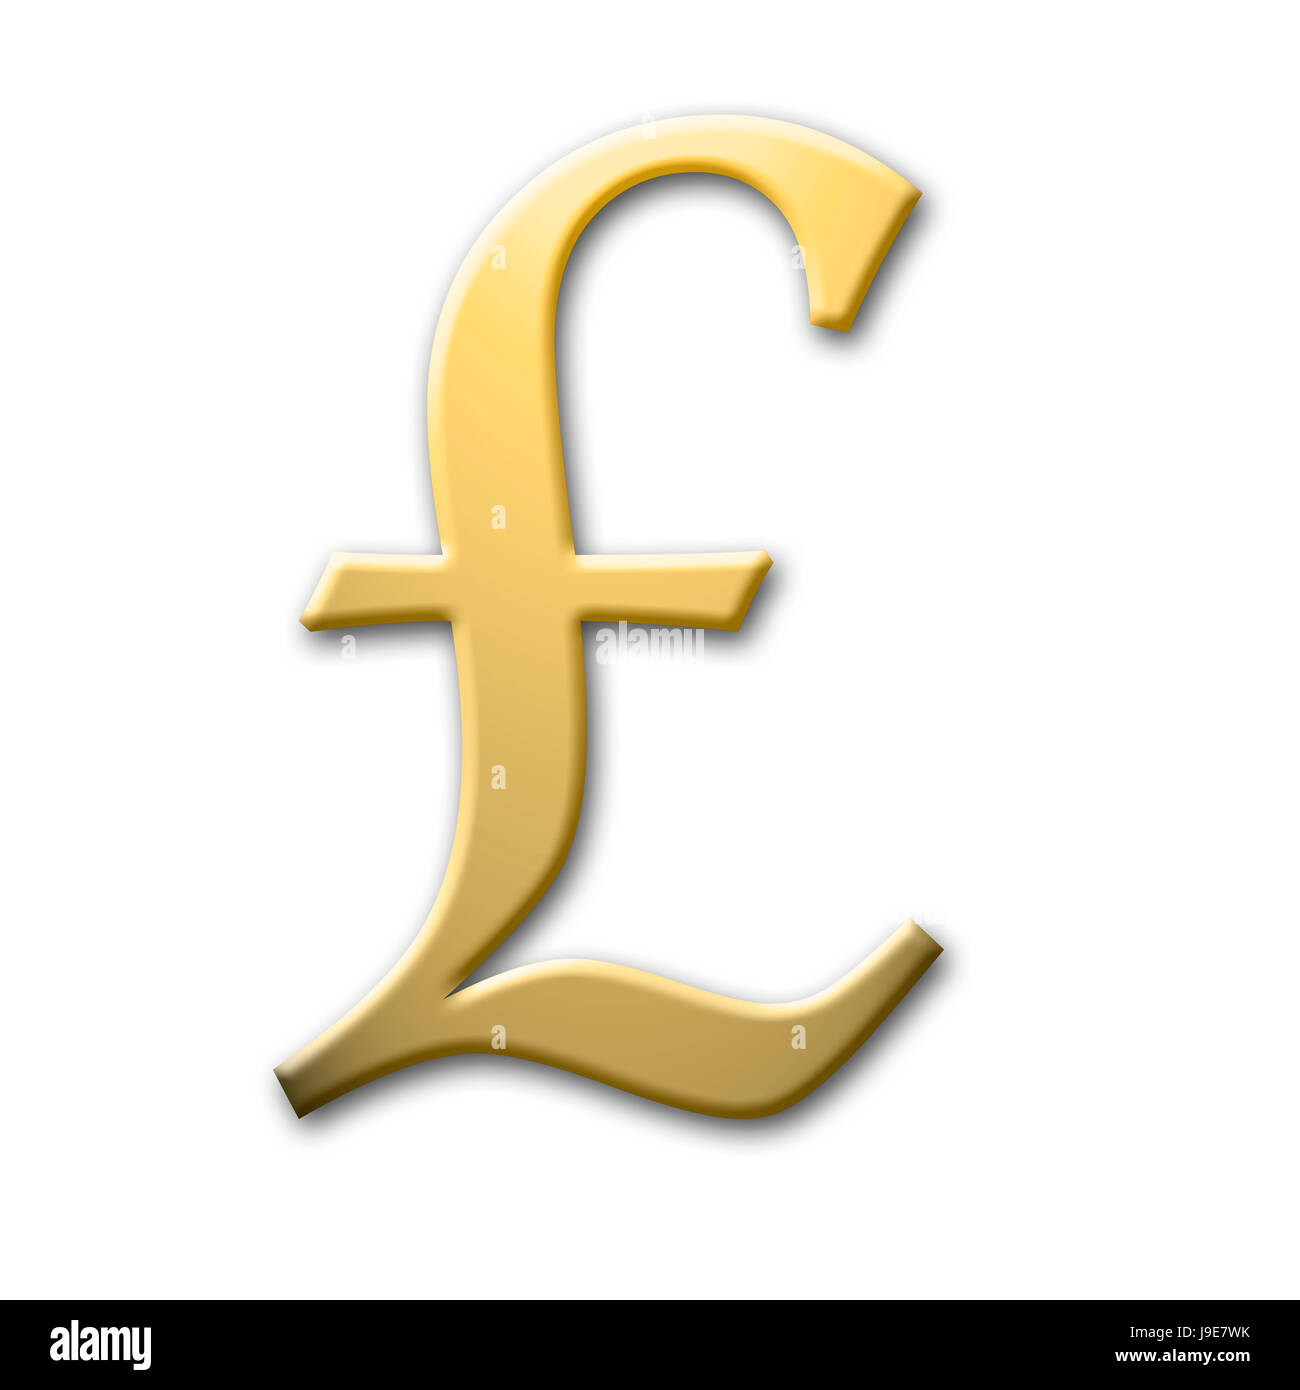 Golden British Pound currency sign, Isolated against the white background Stock Photo